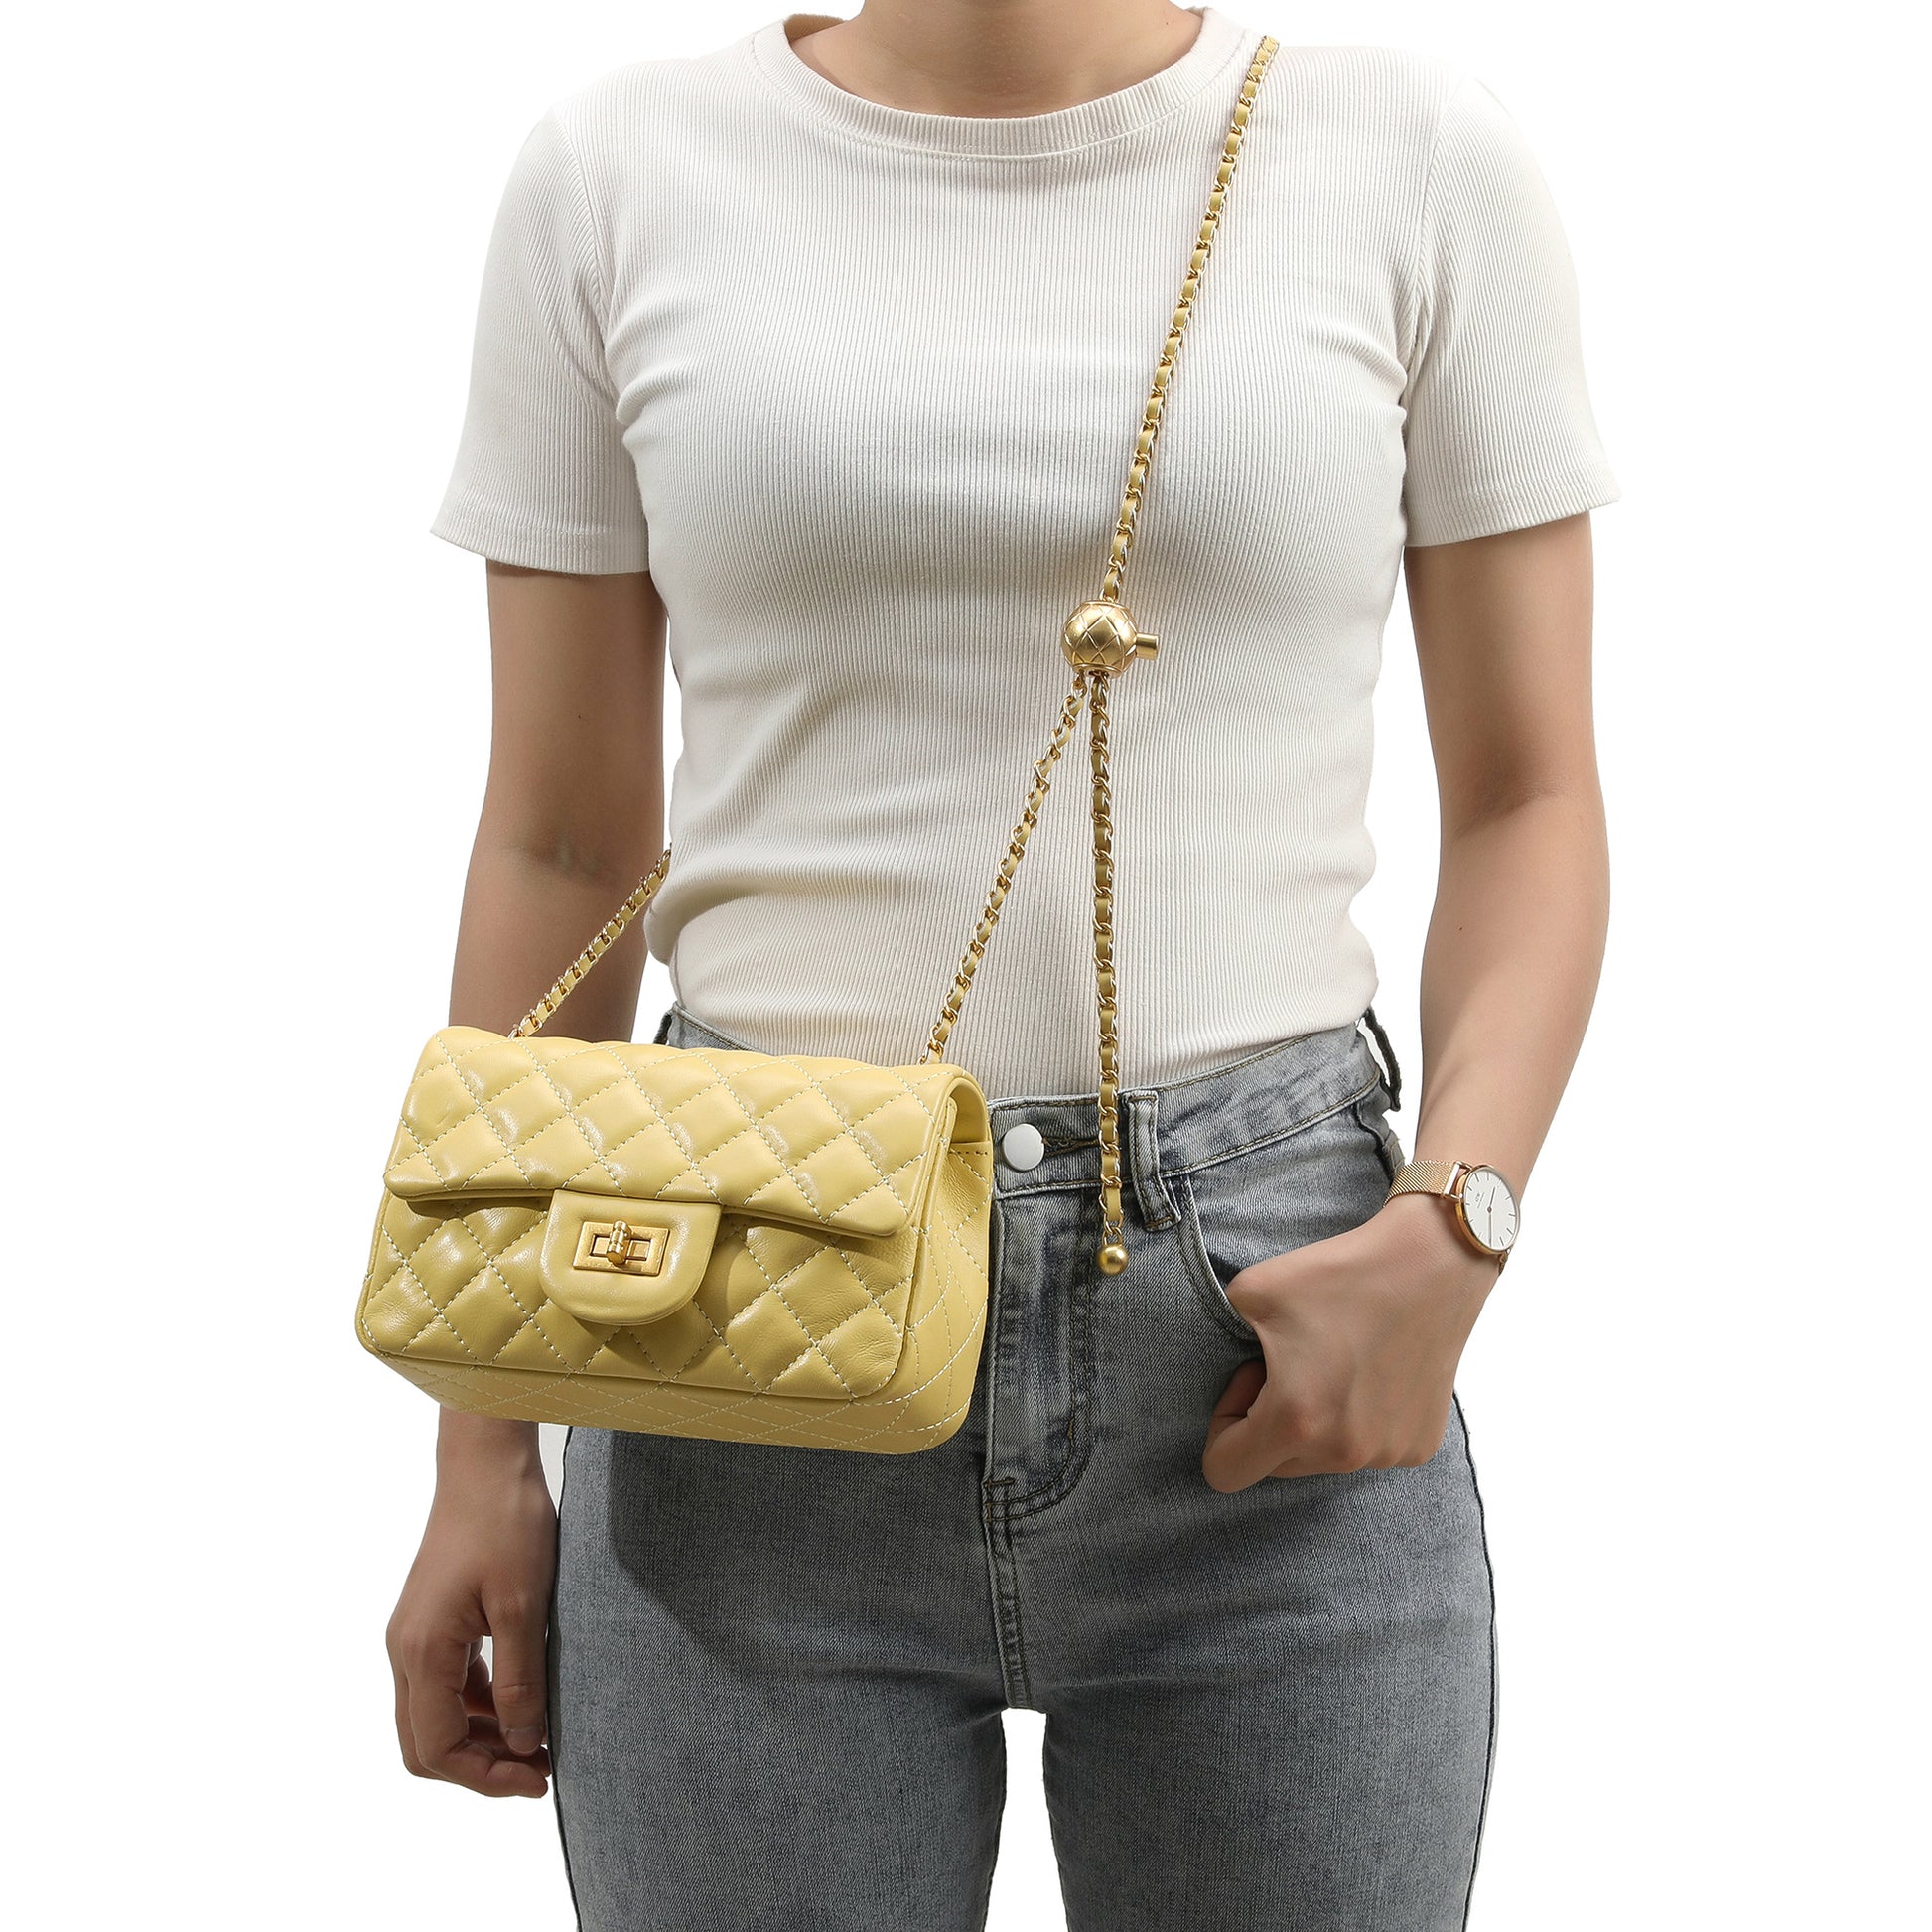 quilted leather crossbody bag